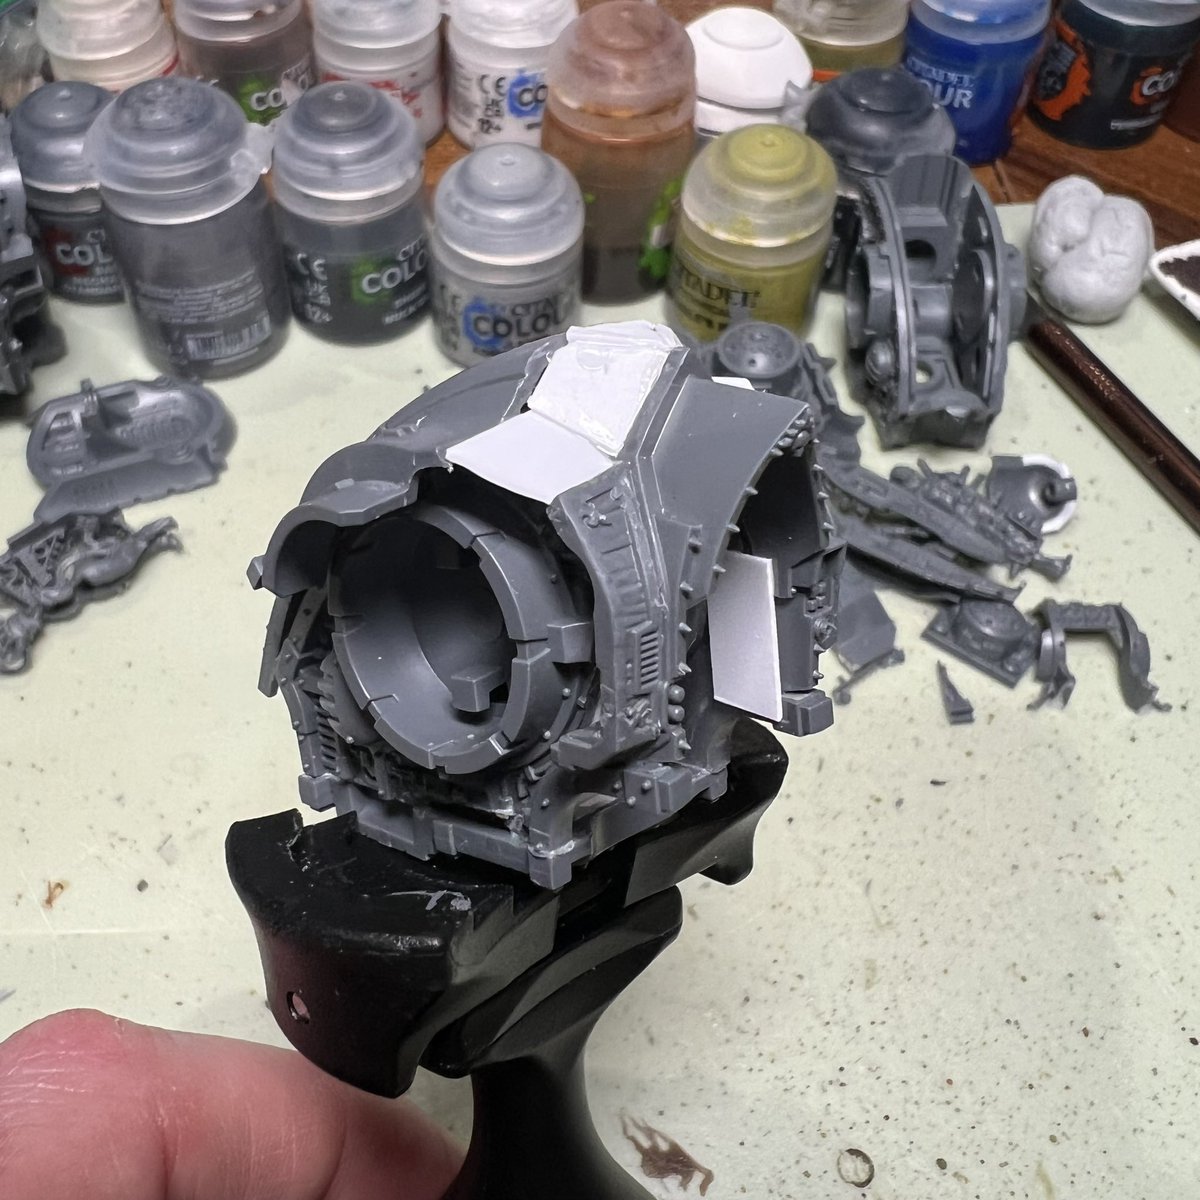 Committed for #HobbyStreak day 400 and started roughing the gap-fill ready for greenstuff - still not sure how it's going to look, but it'll be weird